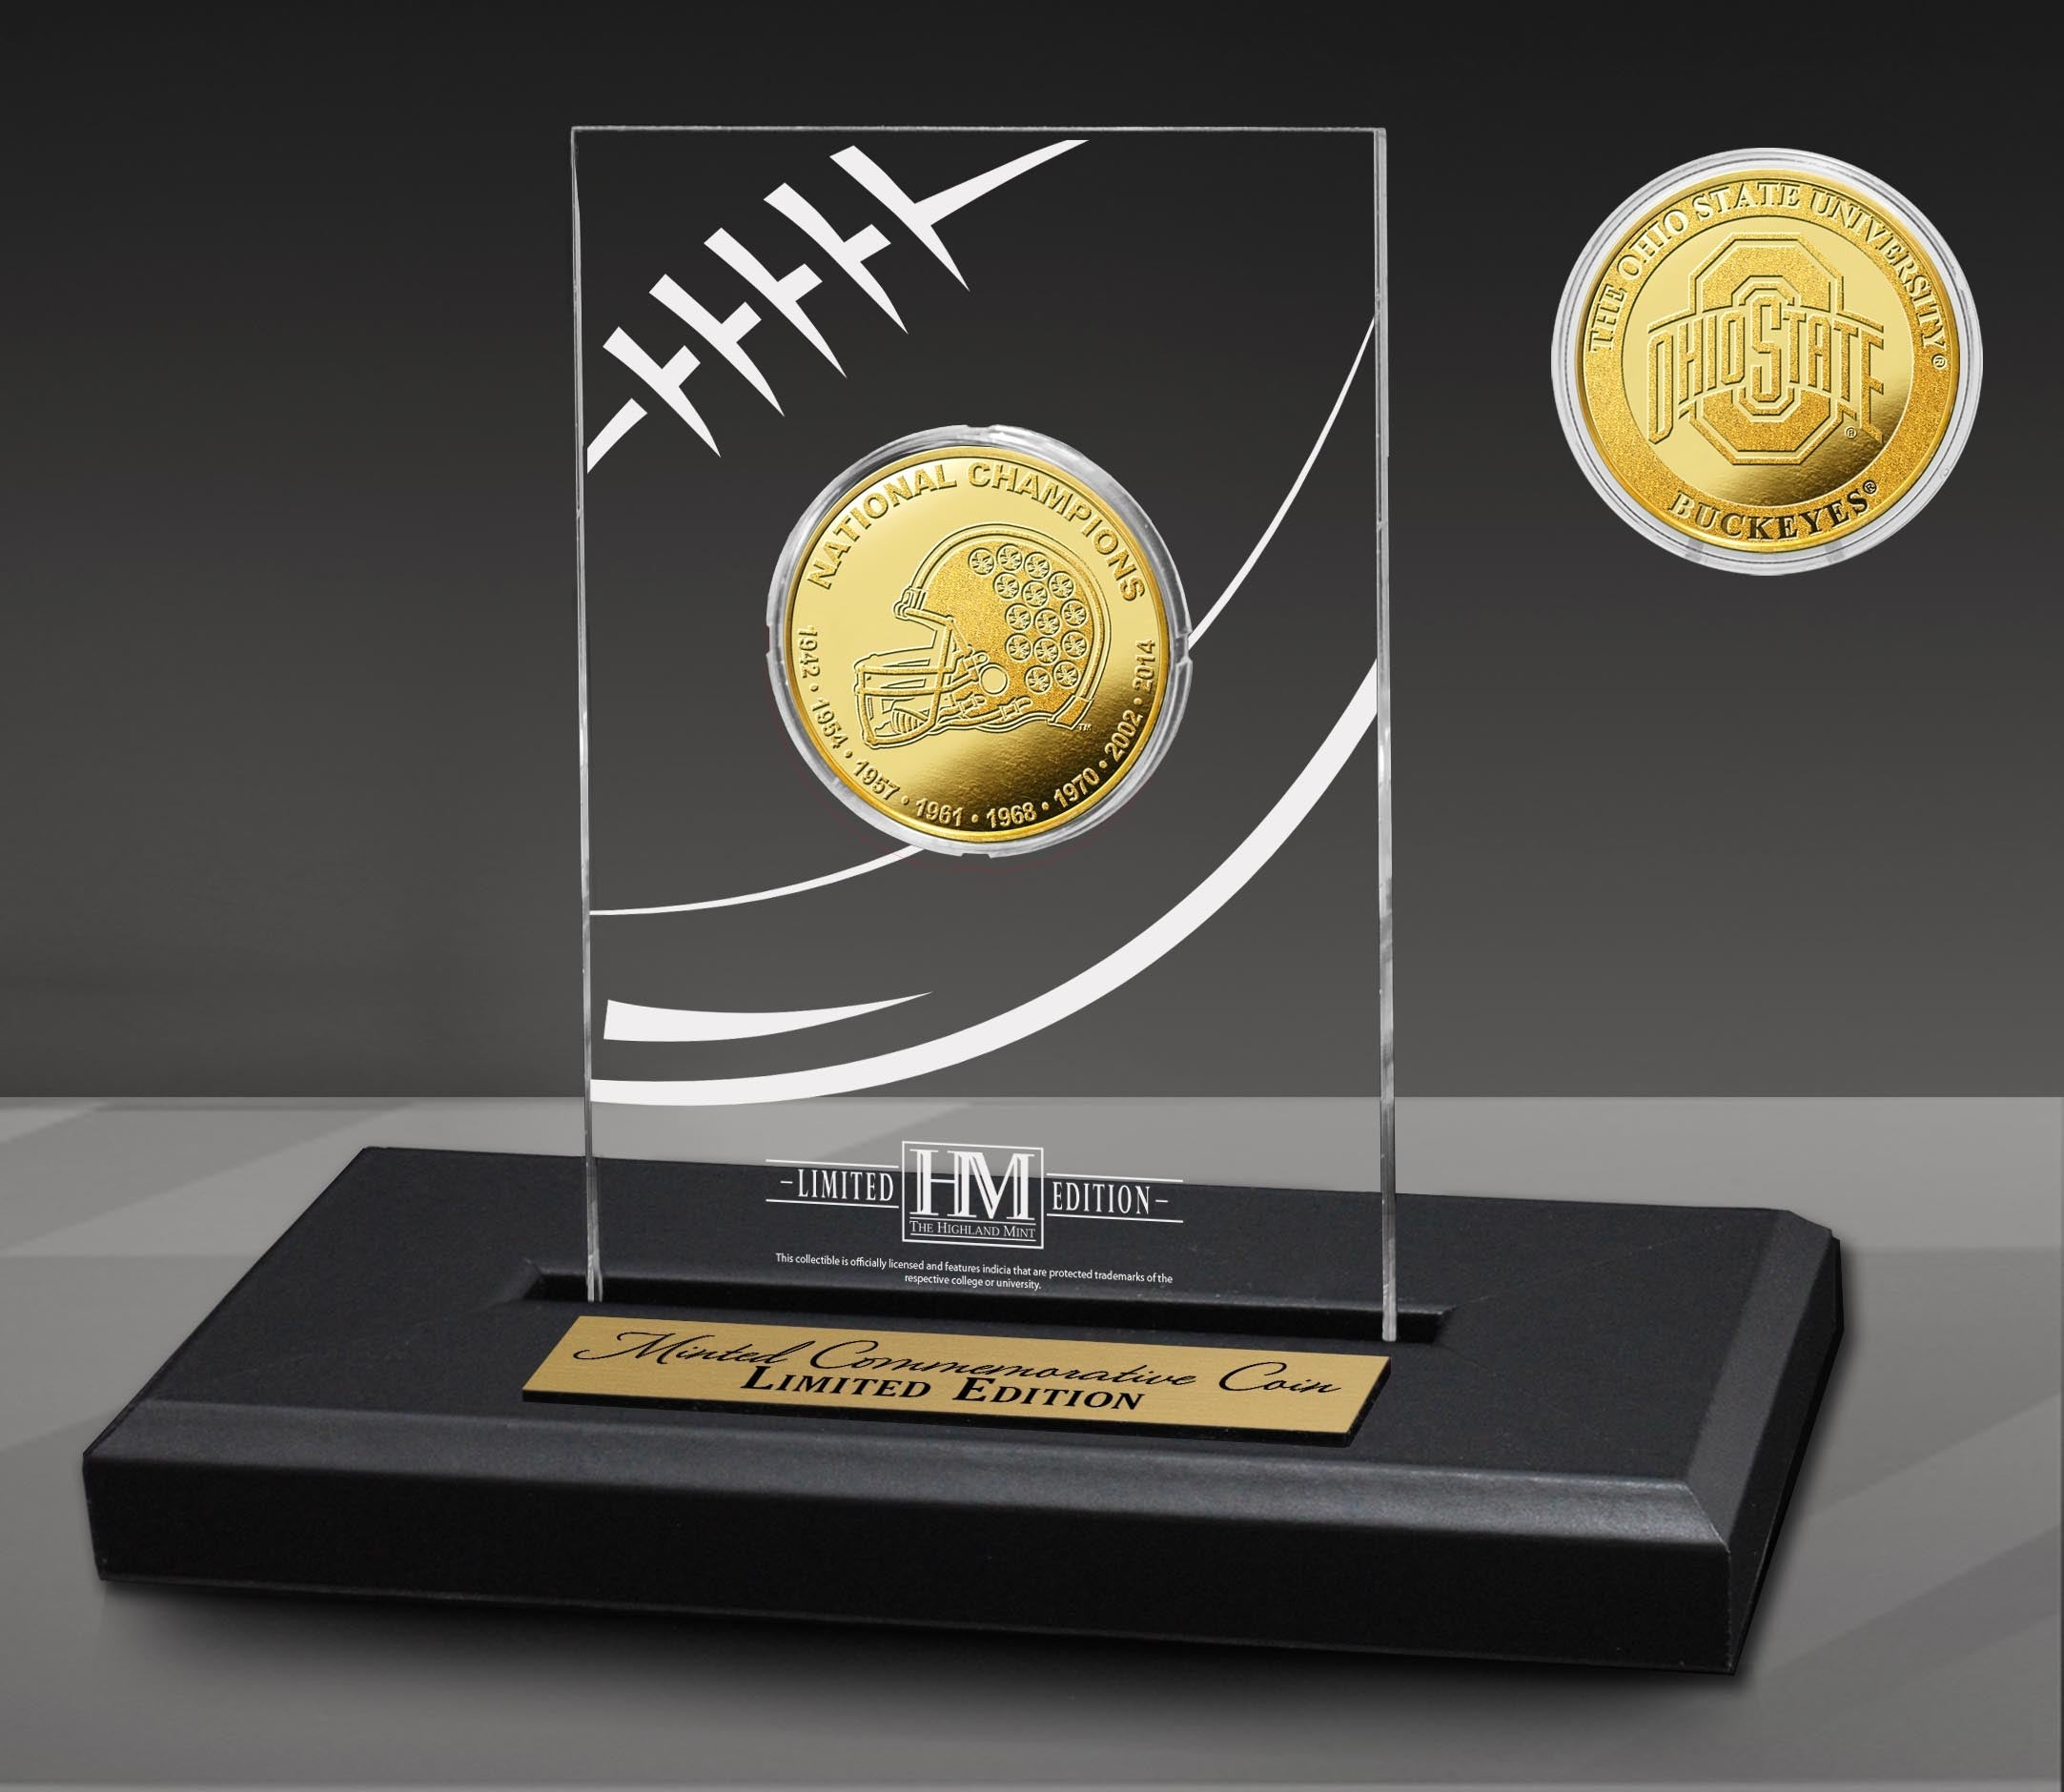 Ohio State University Buckeyes 8-Time National Champions Gold Coin in Acrylic Display